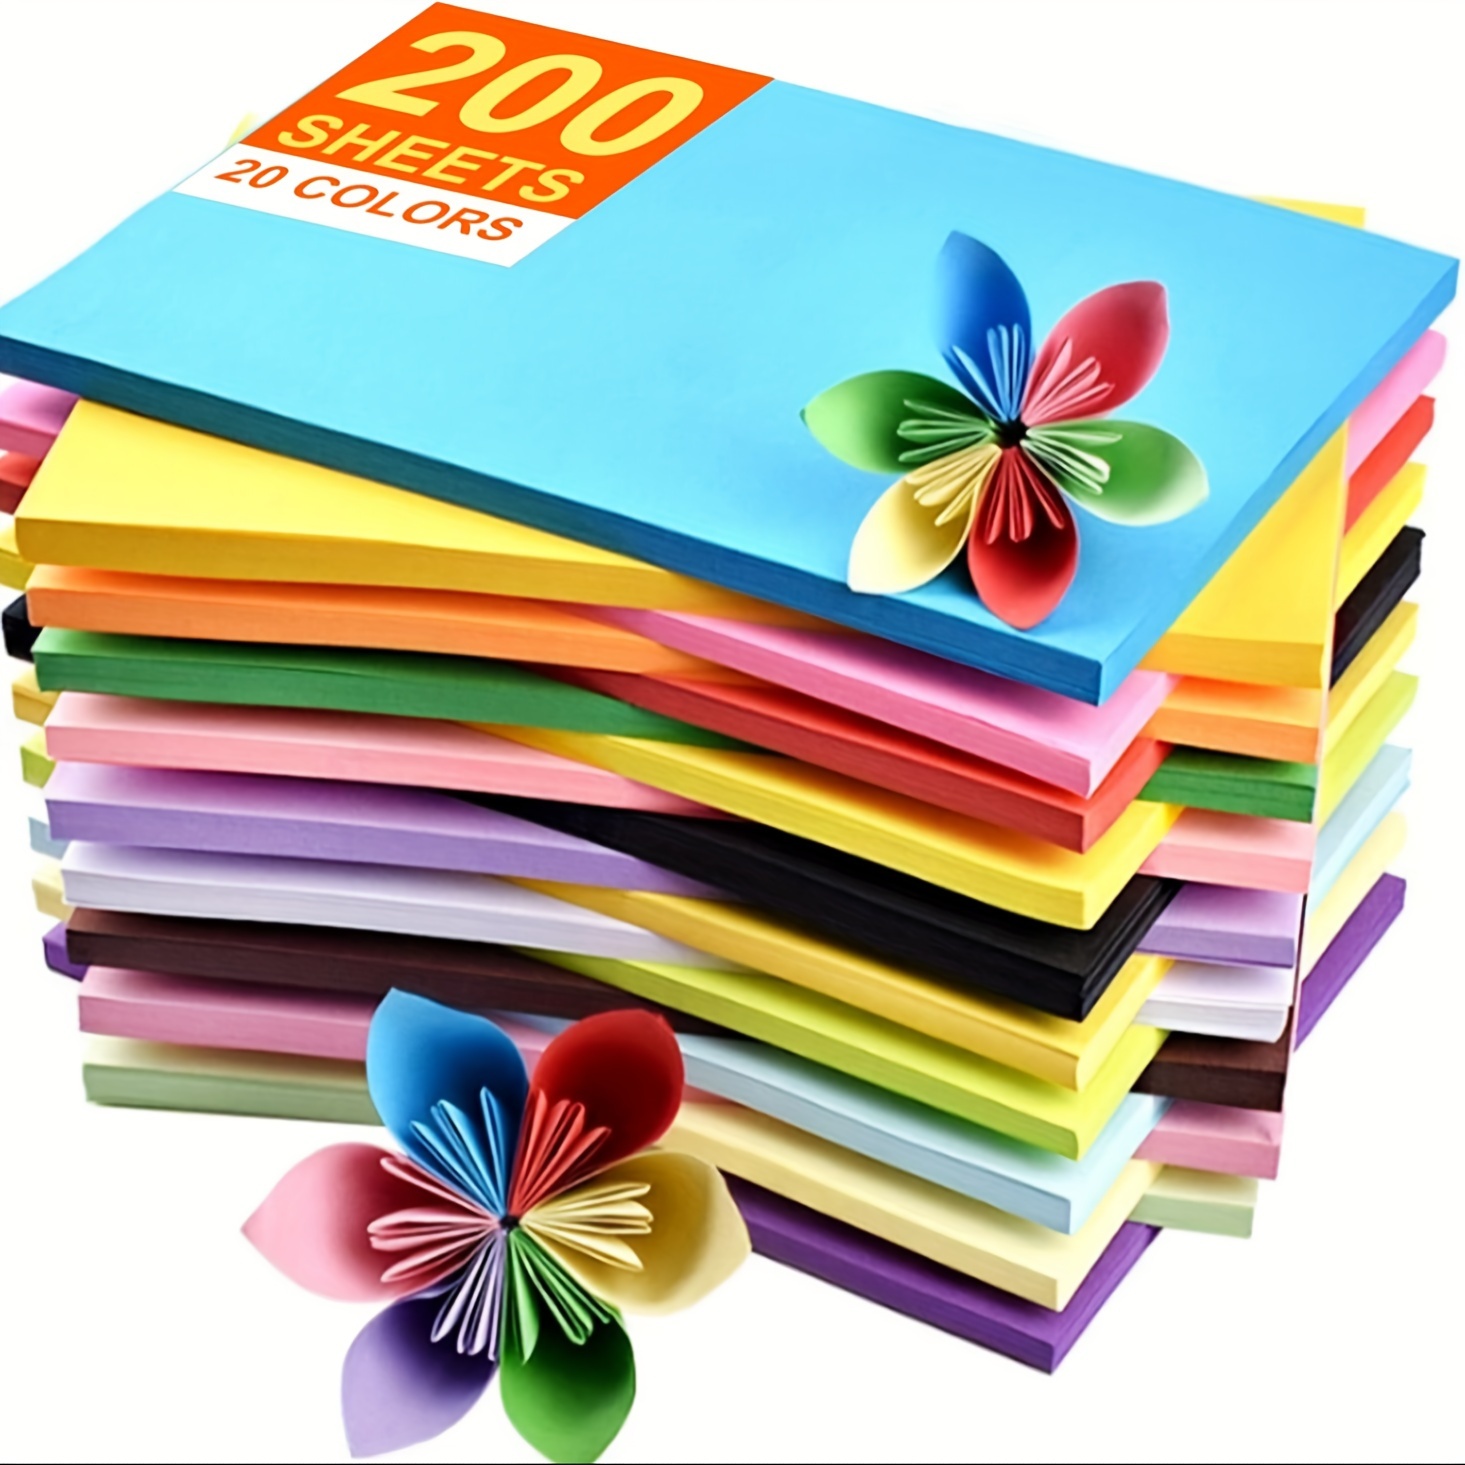 

Firstop Premium Color Printing & Craft Paper - 100/200 Sheets A4 Size (8"x12"), 20 Vibrant Shades, 70gsm, Perfect For Origami, Collage, And Diy Projects